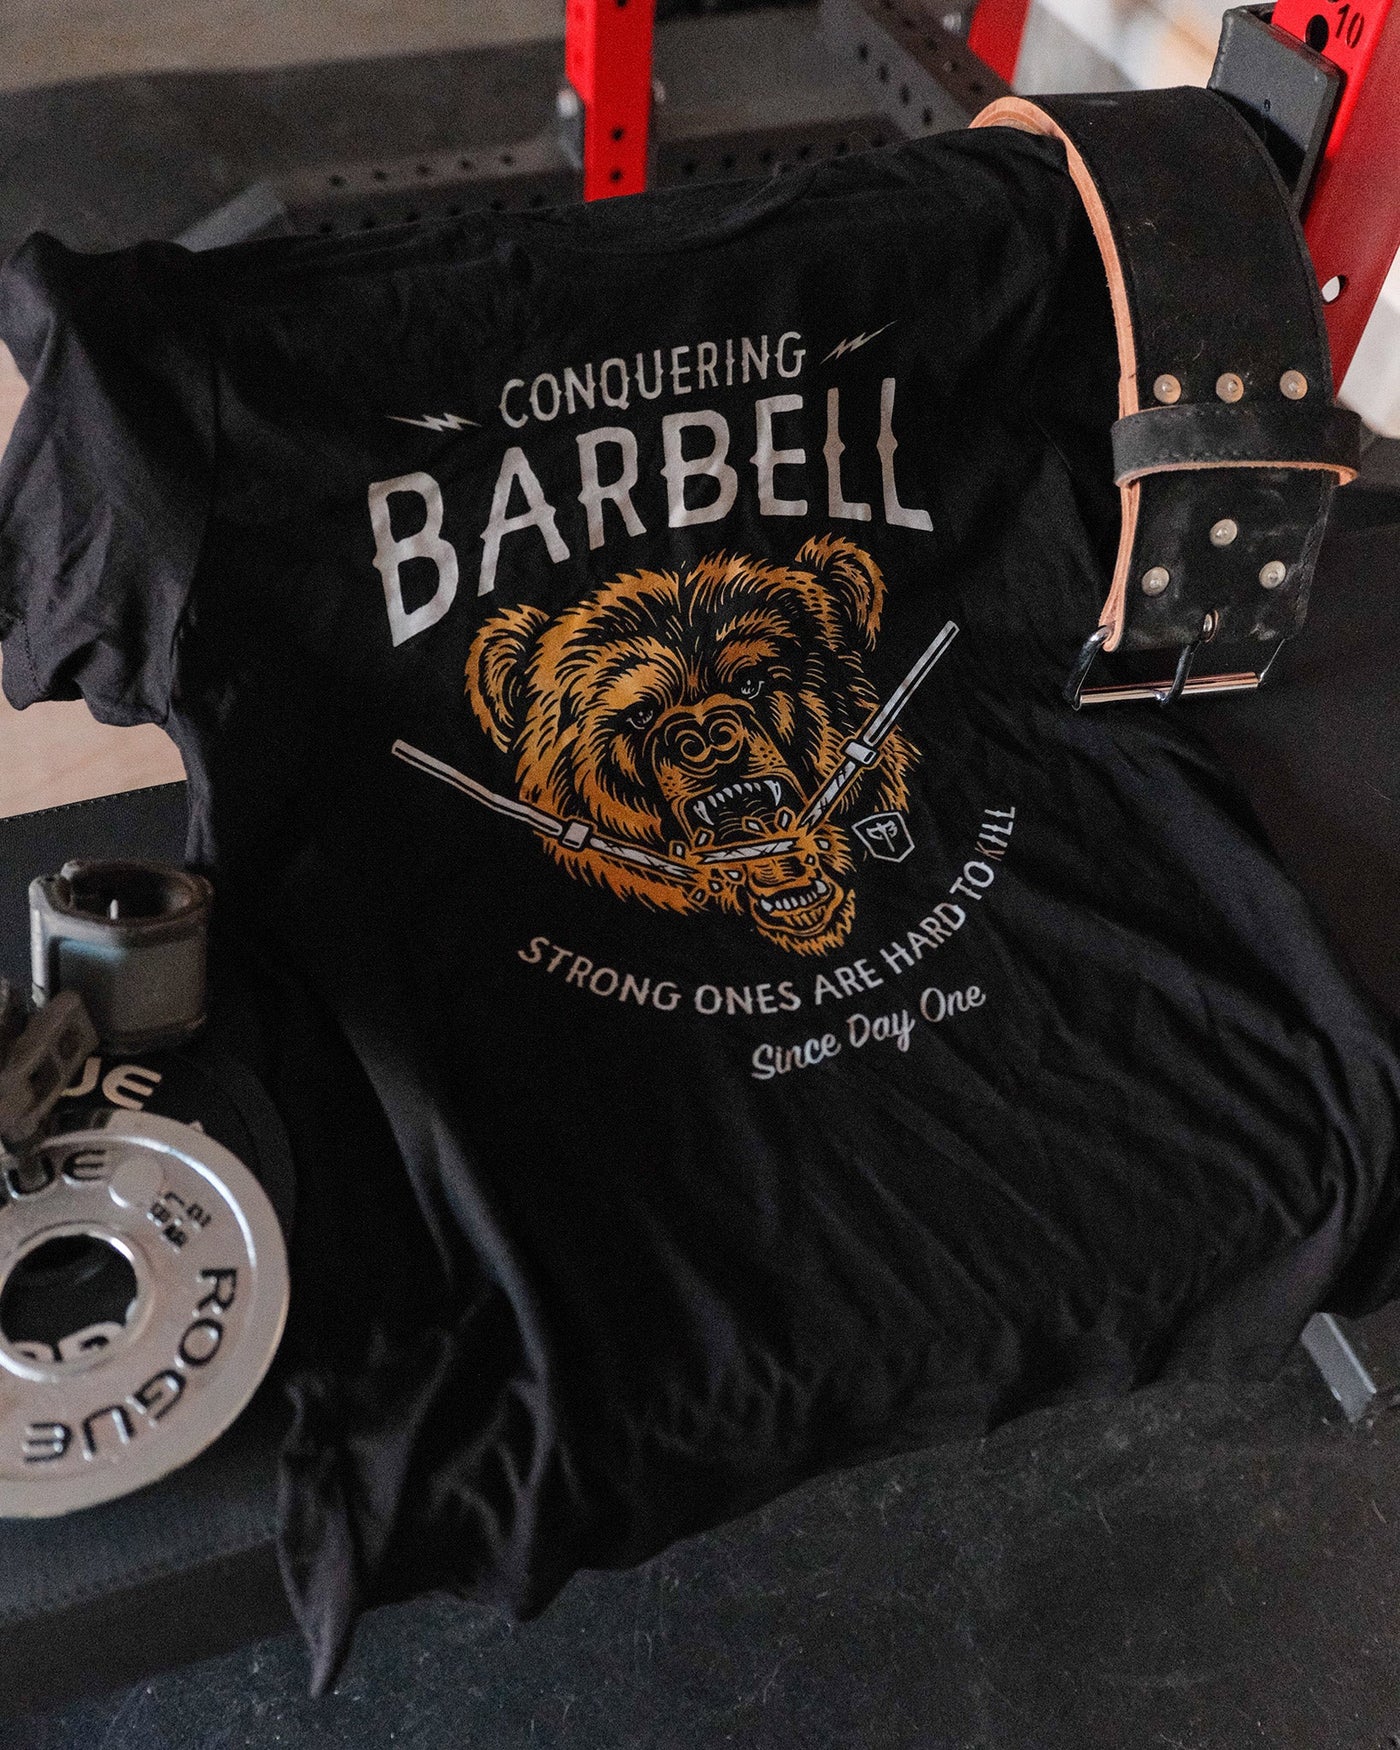 Breaking Barbell Bear - on Black Tee - Conquering Barbell